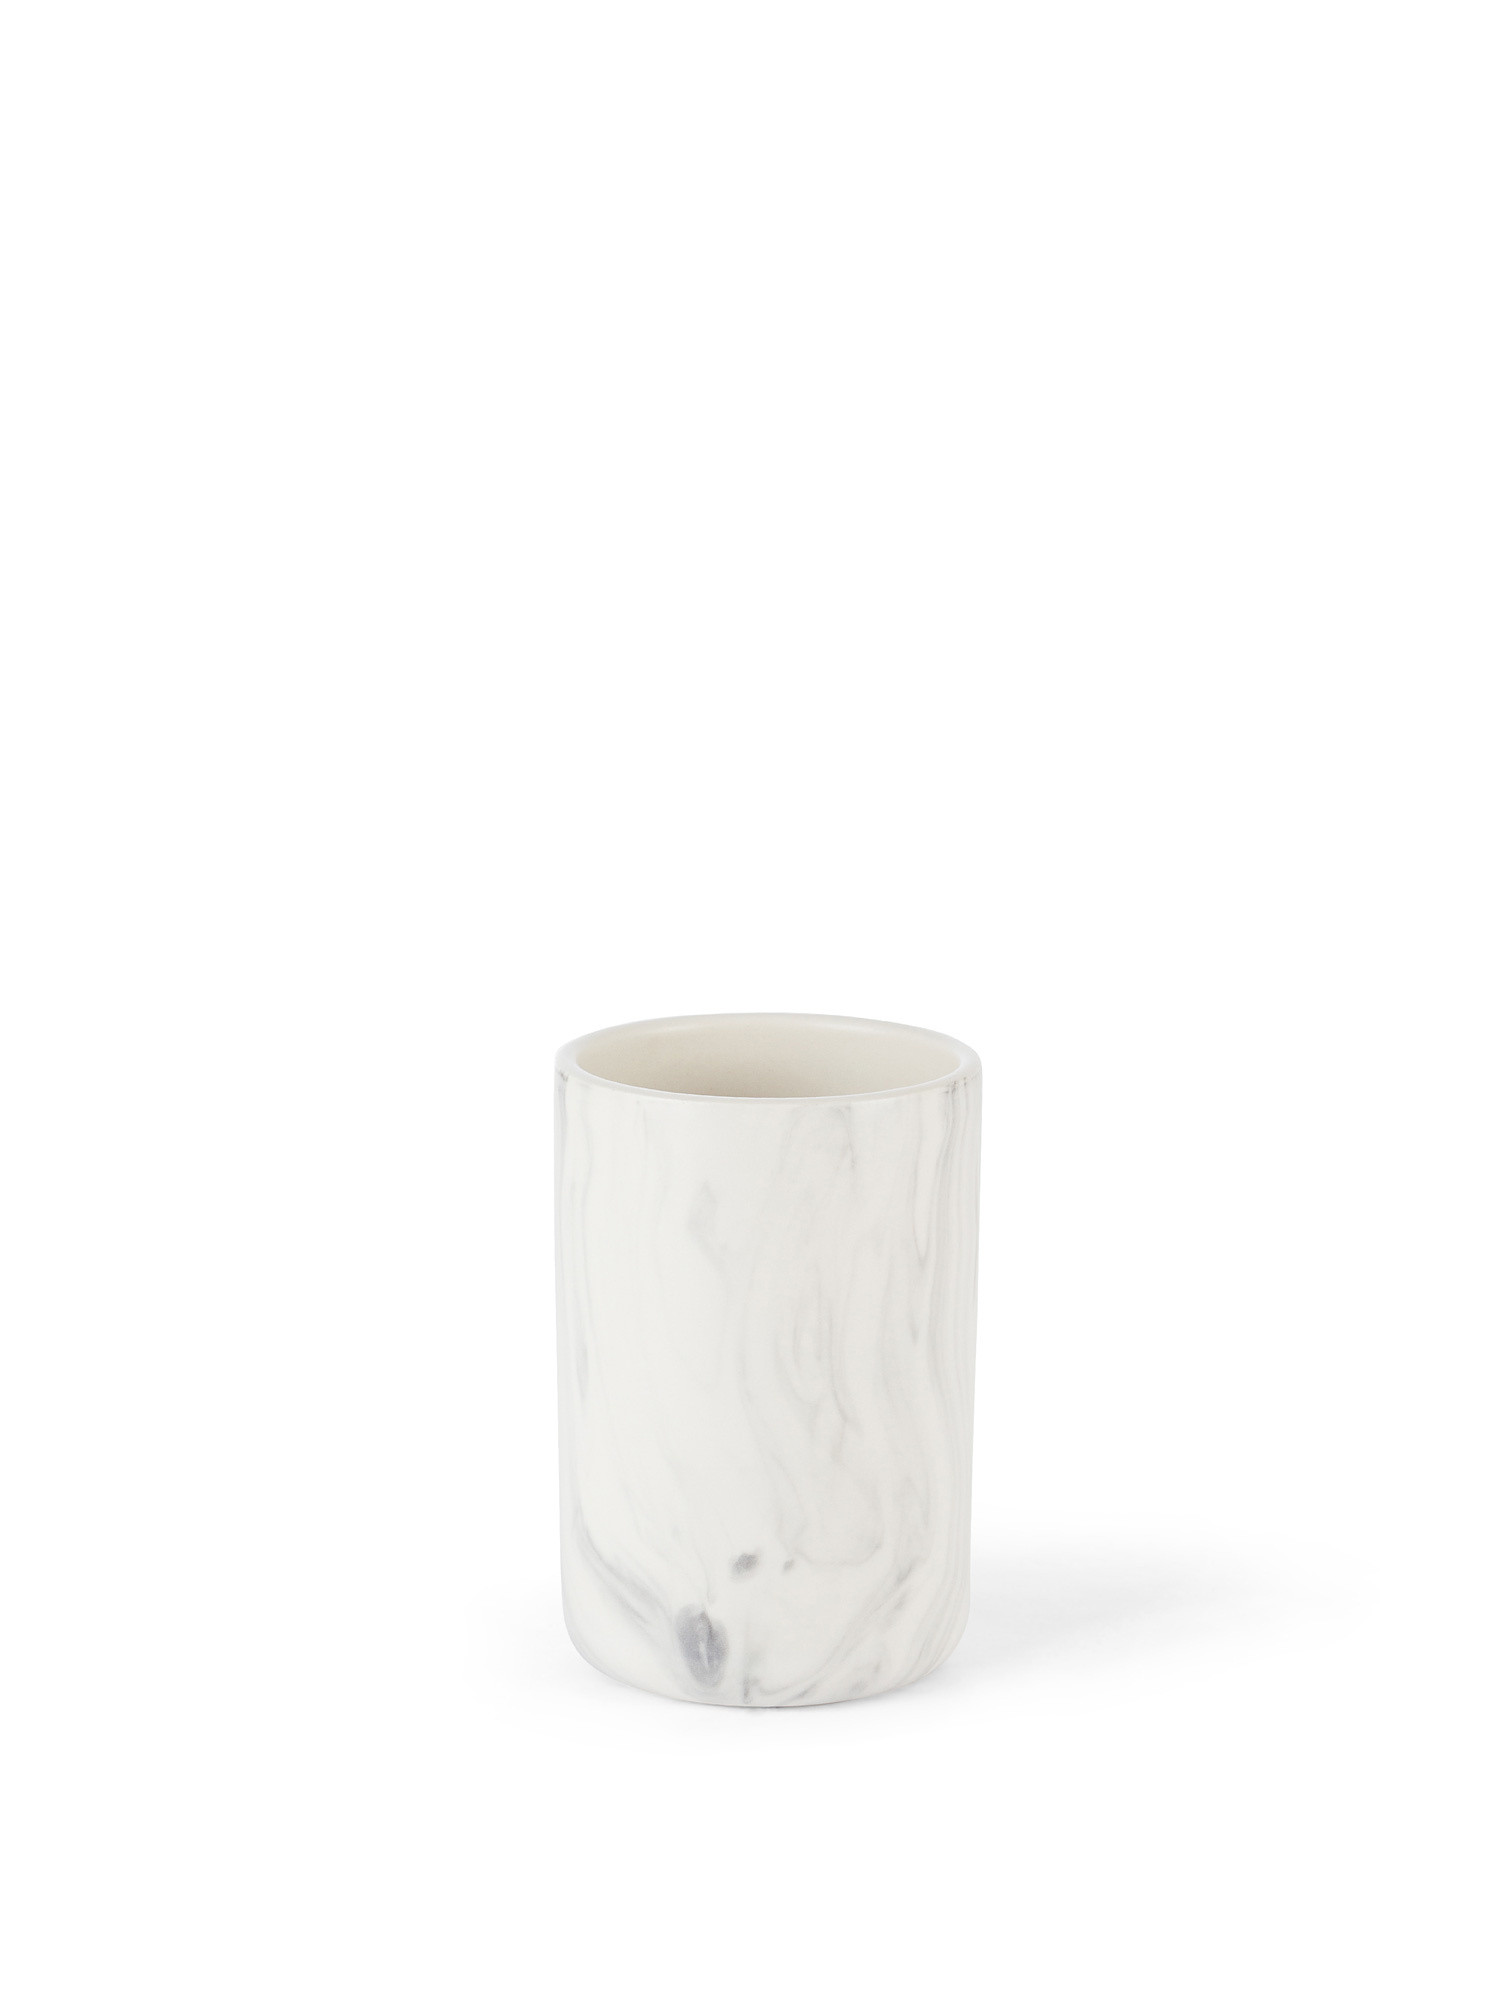 Portuguese ceramic toothbrush holder with marble effect, White Black, large image number 0